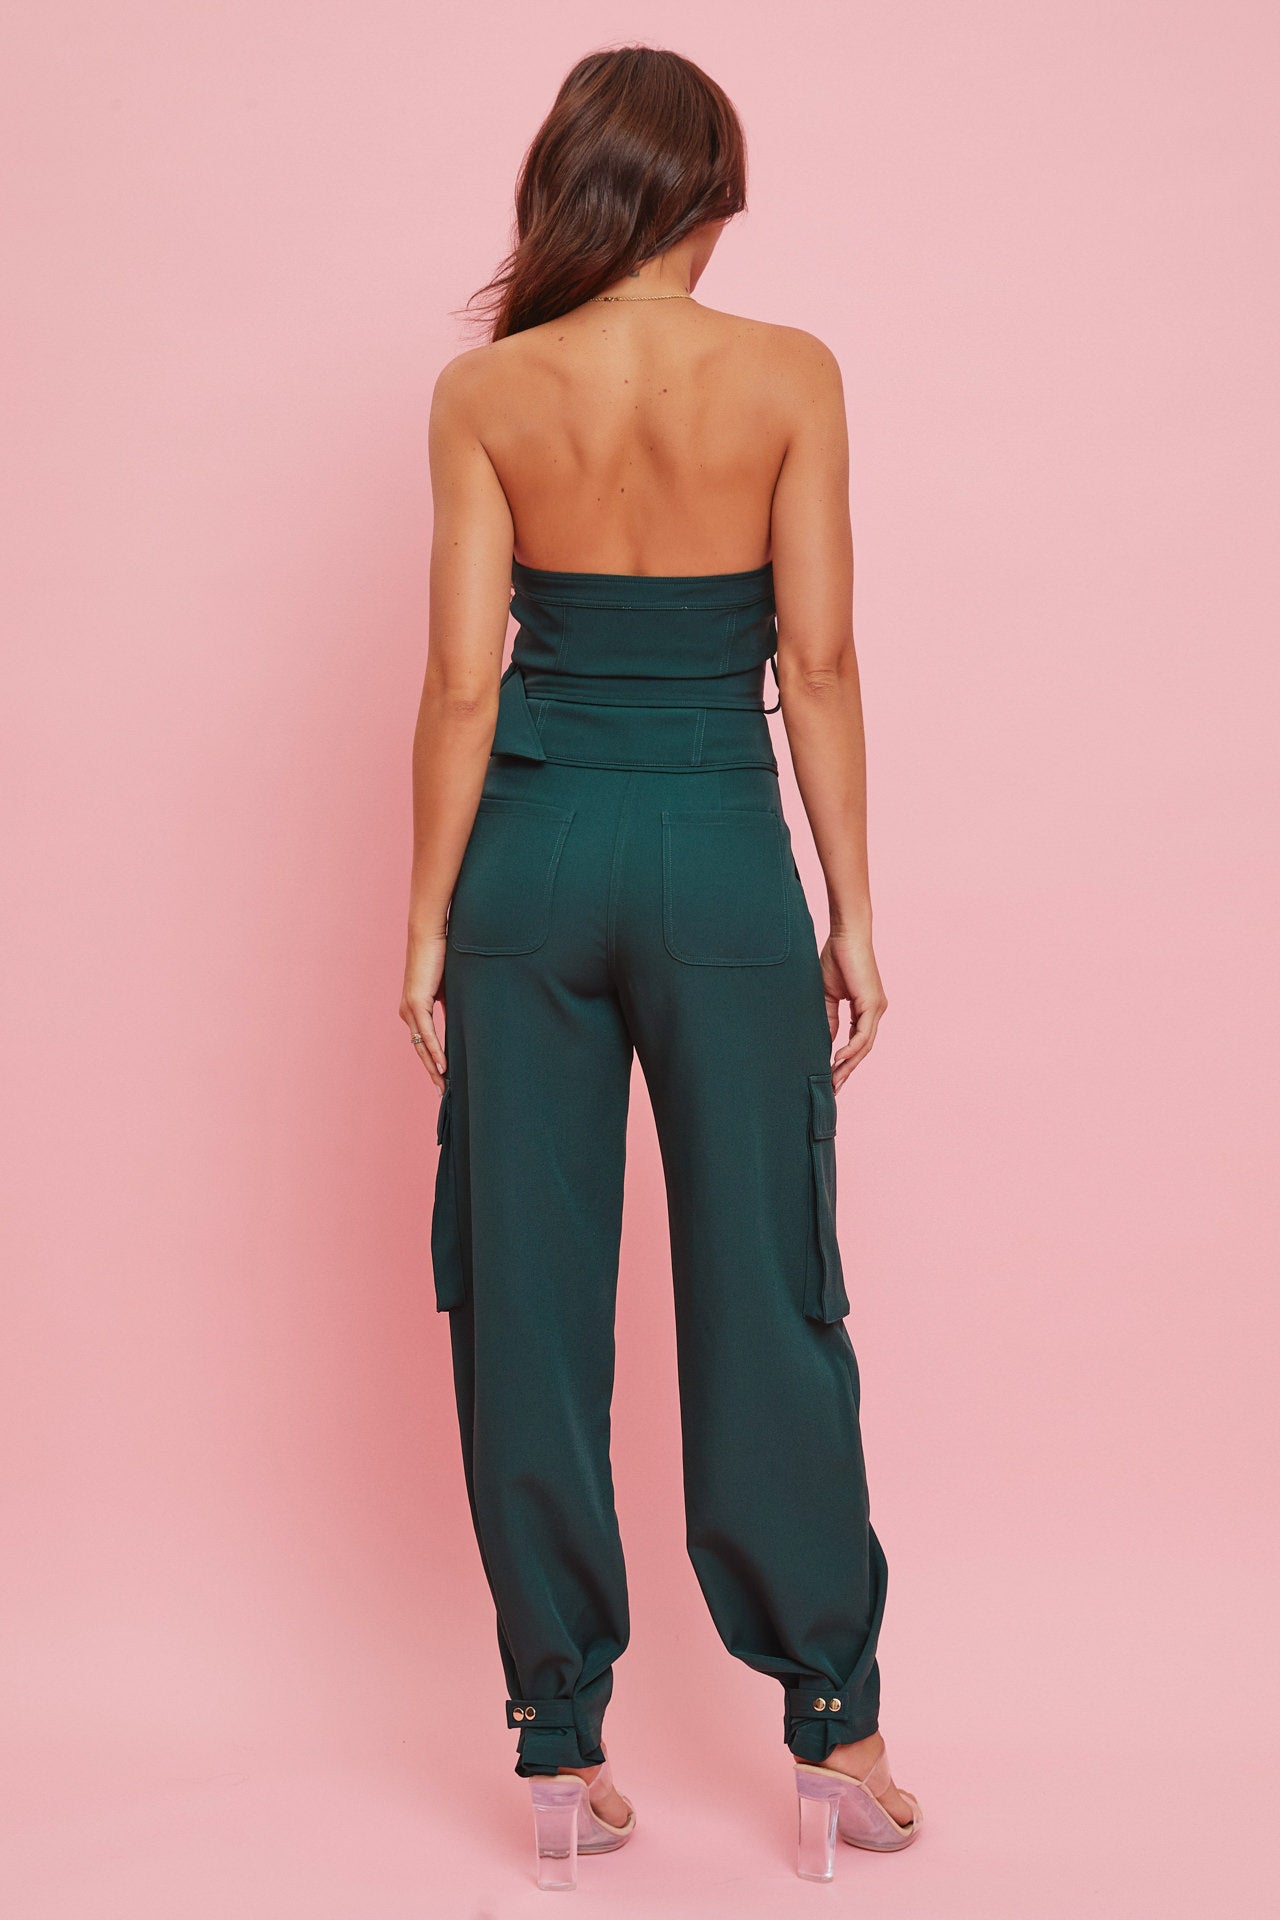 Woven Cargo Tube Top and Pants Set